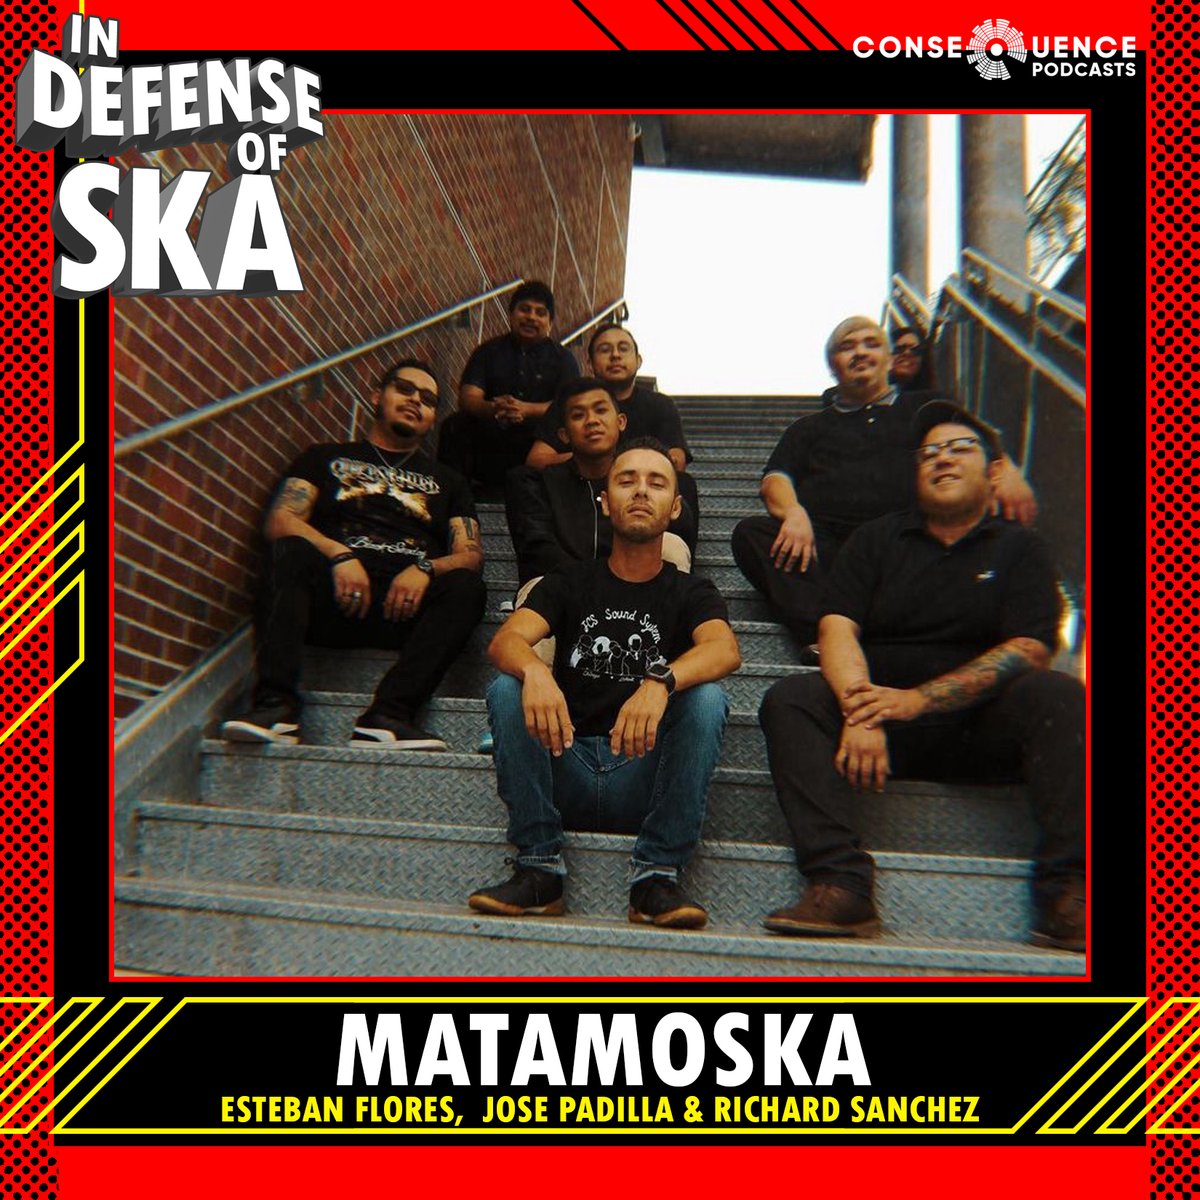 Today we talk to @matamoska_ about their new @BadTimeRec album, their history in the LA DIY Latino backyard scene, being non-white in an LA band in the aftermath of the LA Riots, Sister Nancy and so much more!